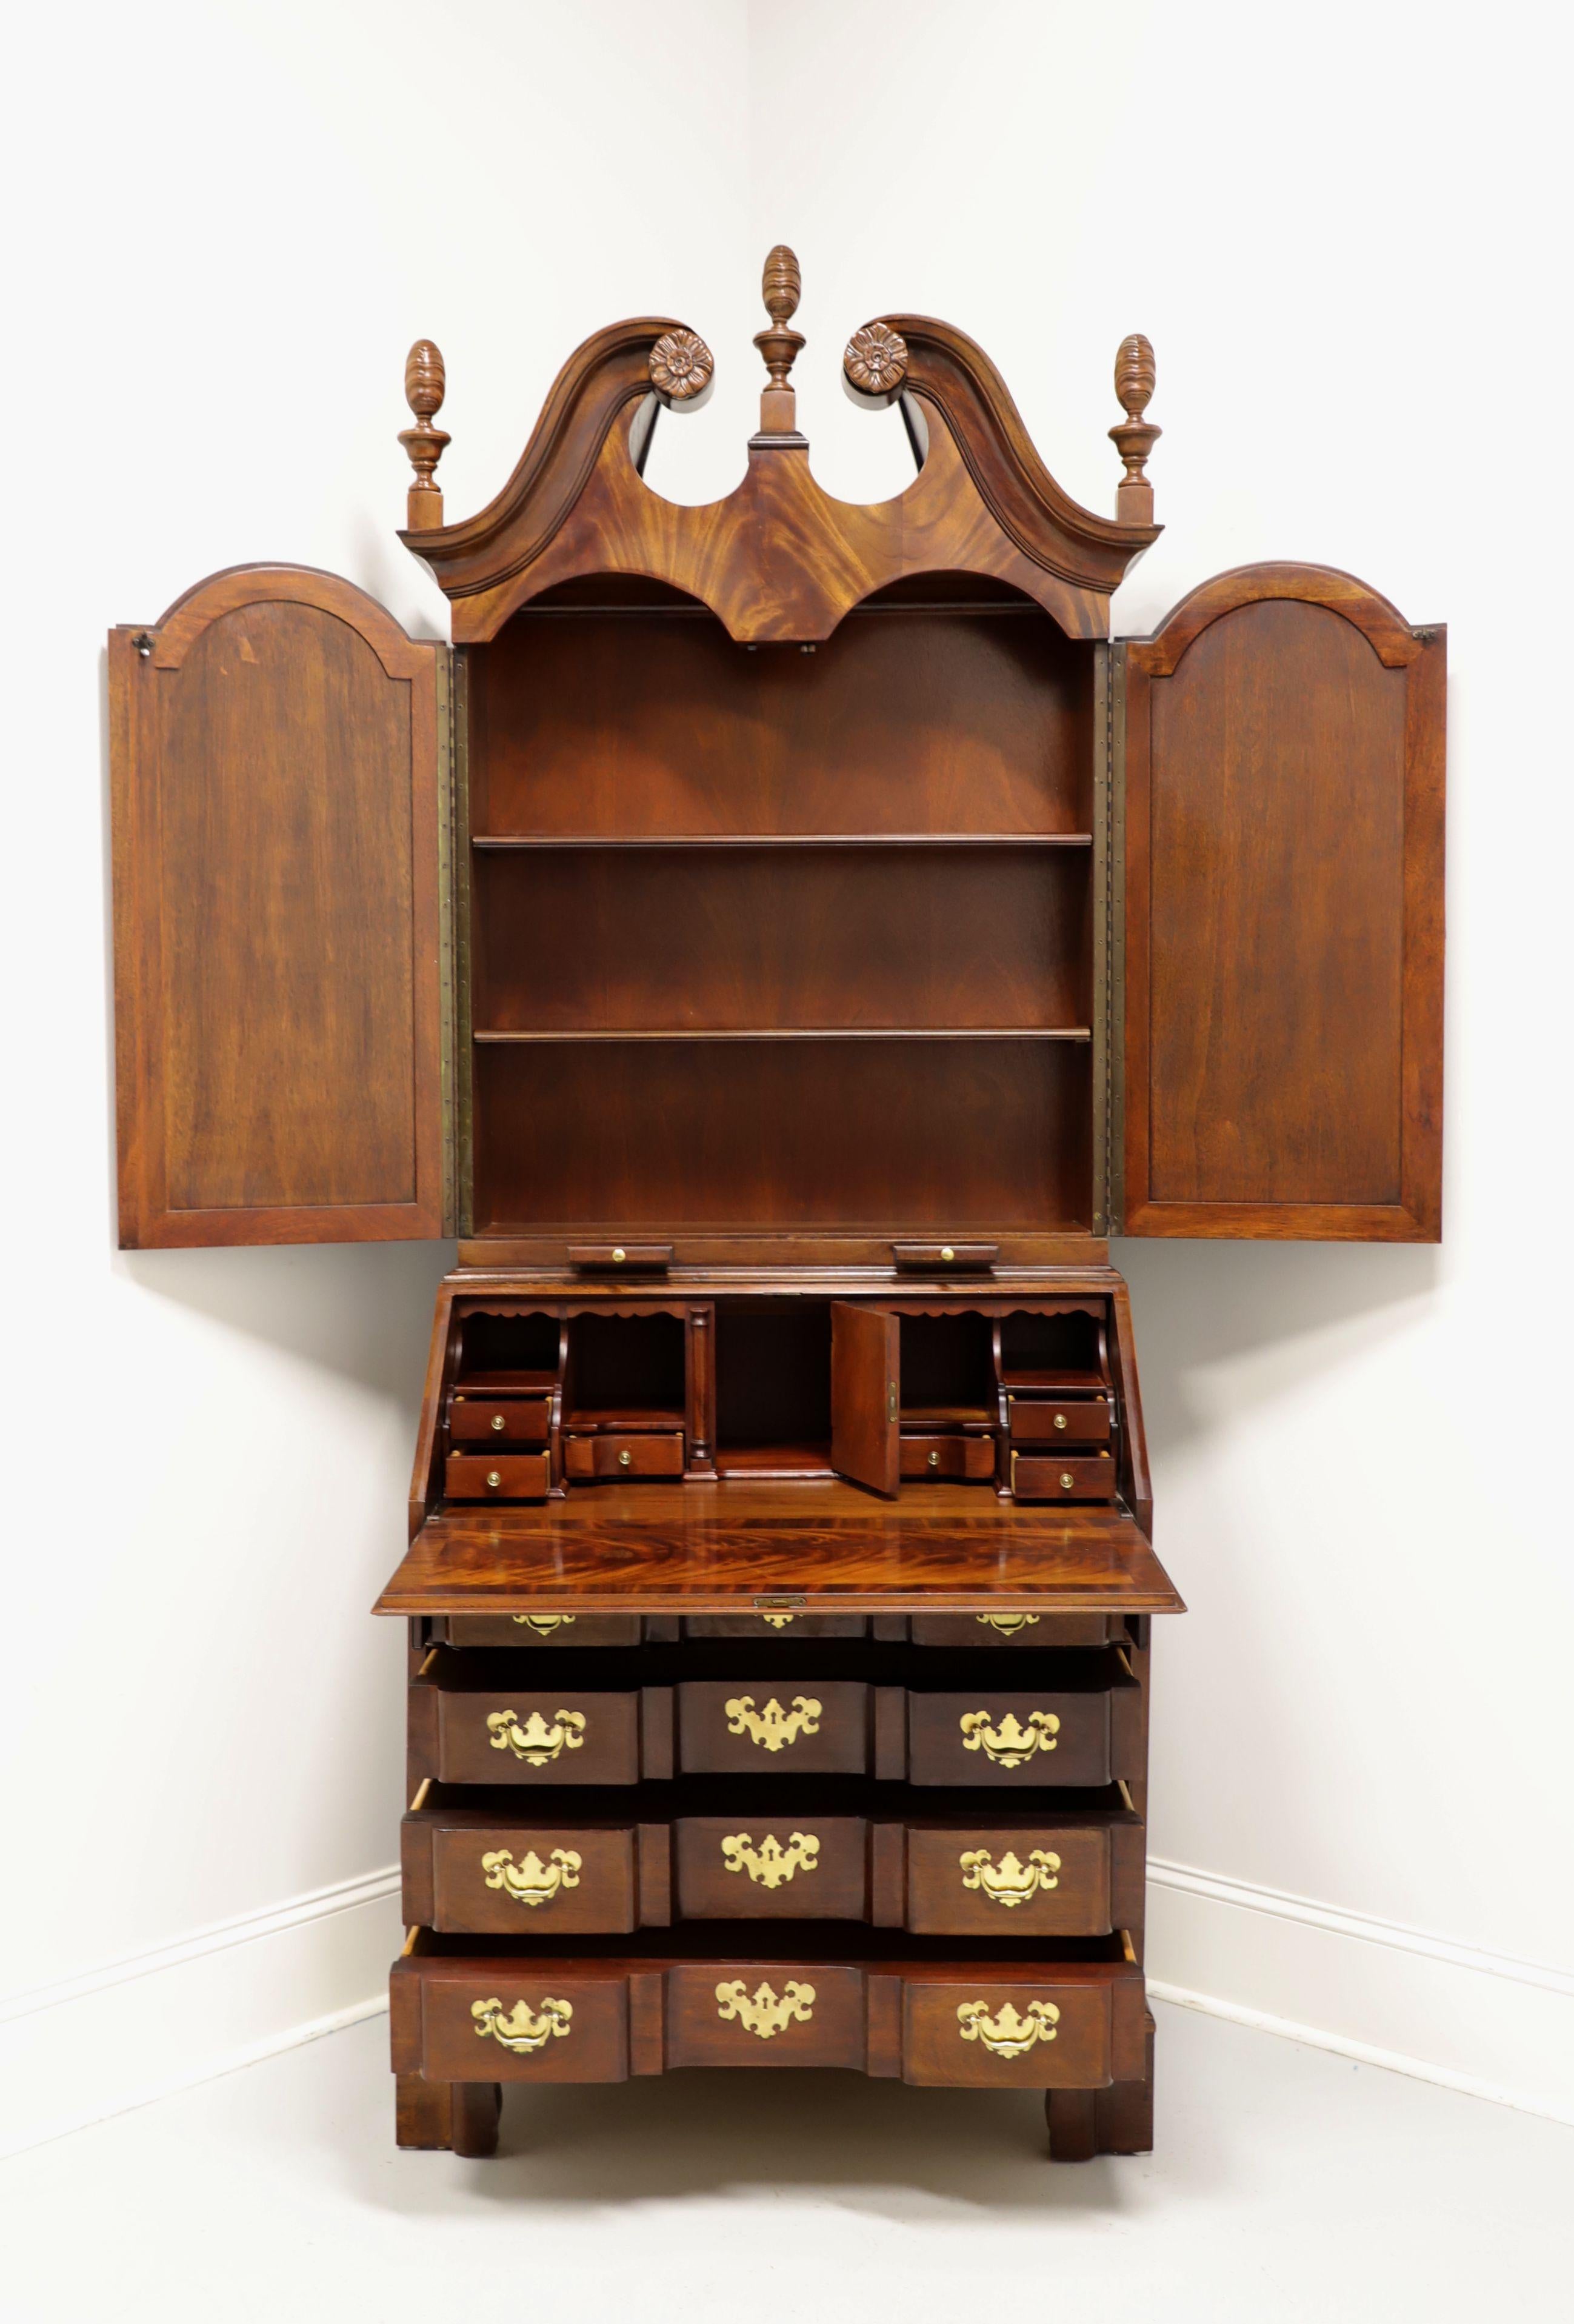 American TOMLINSON Crotch Mahogany Block Front Secretary Desk with Blind Bookcase For Sale